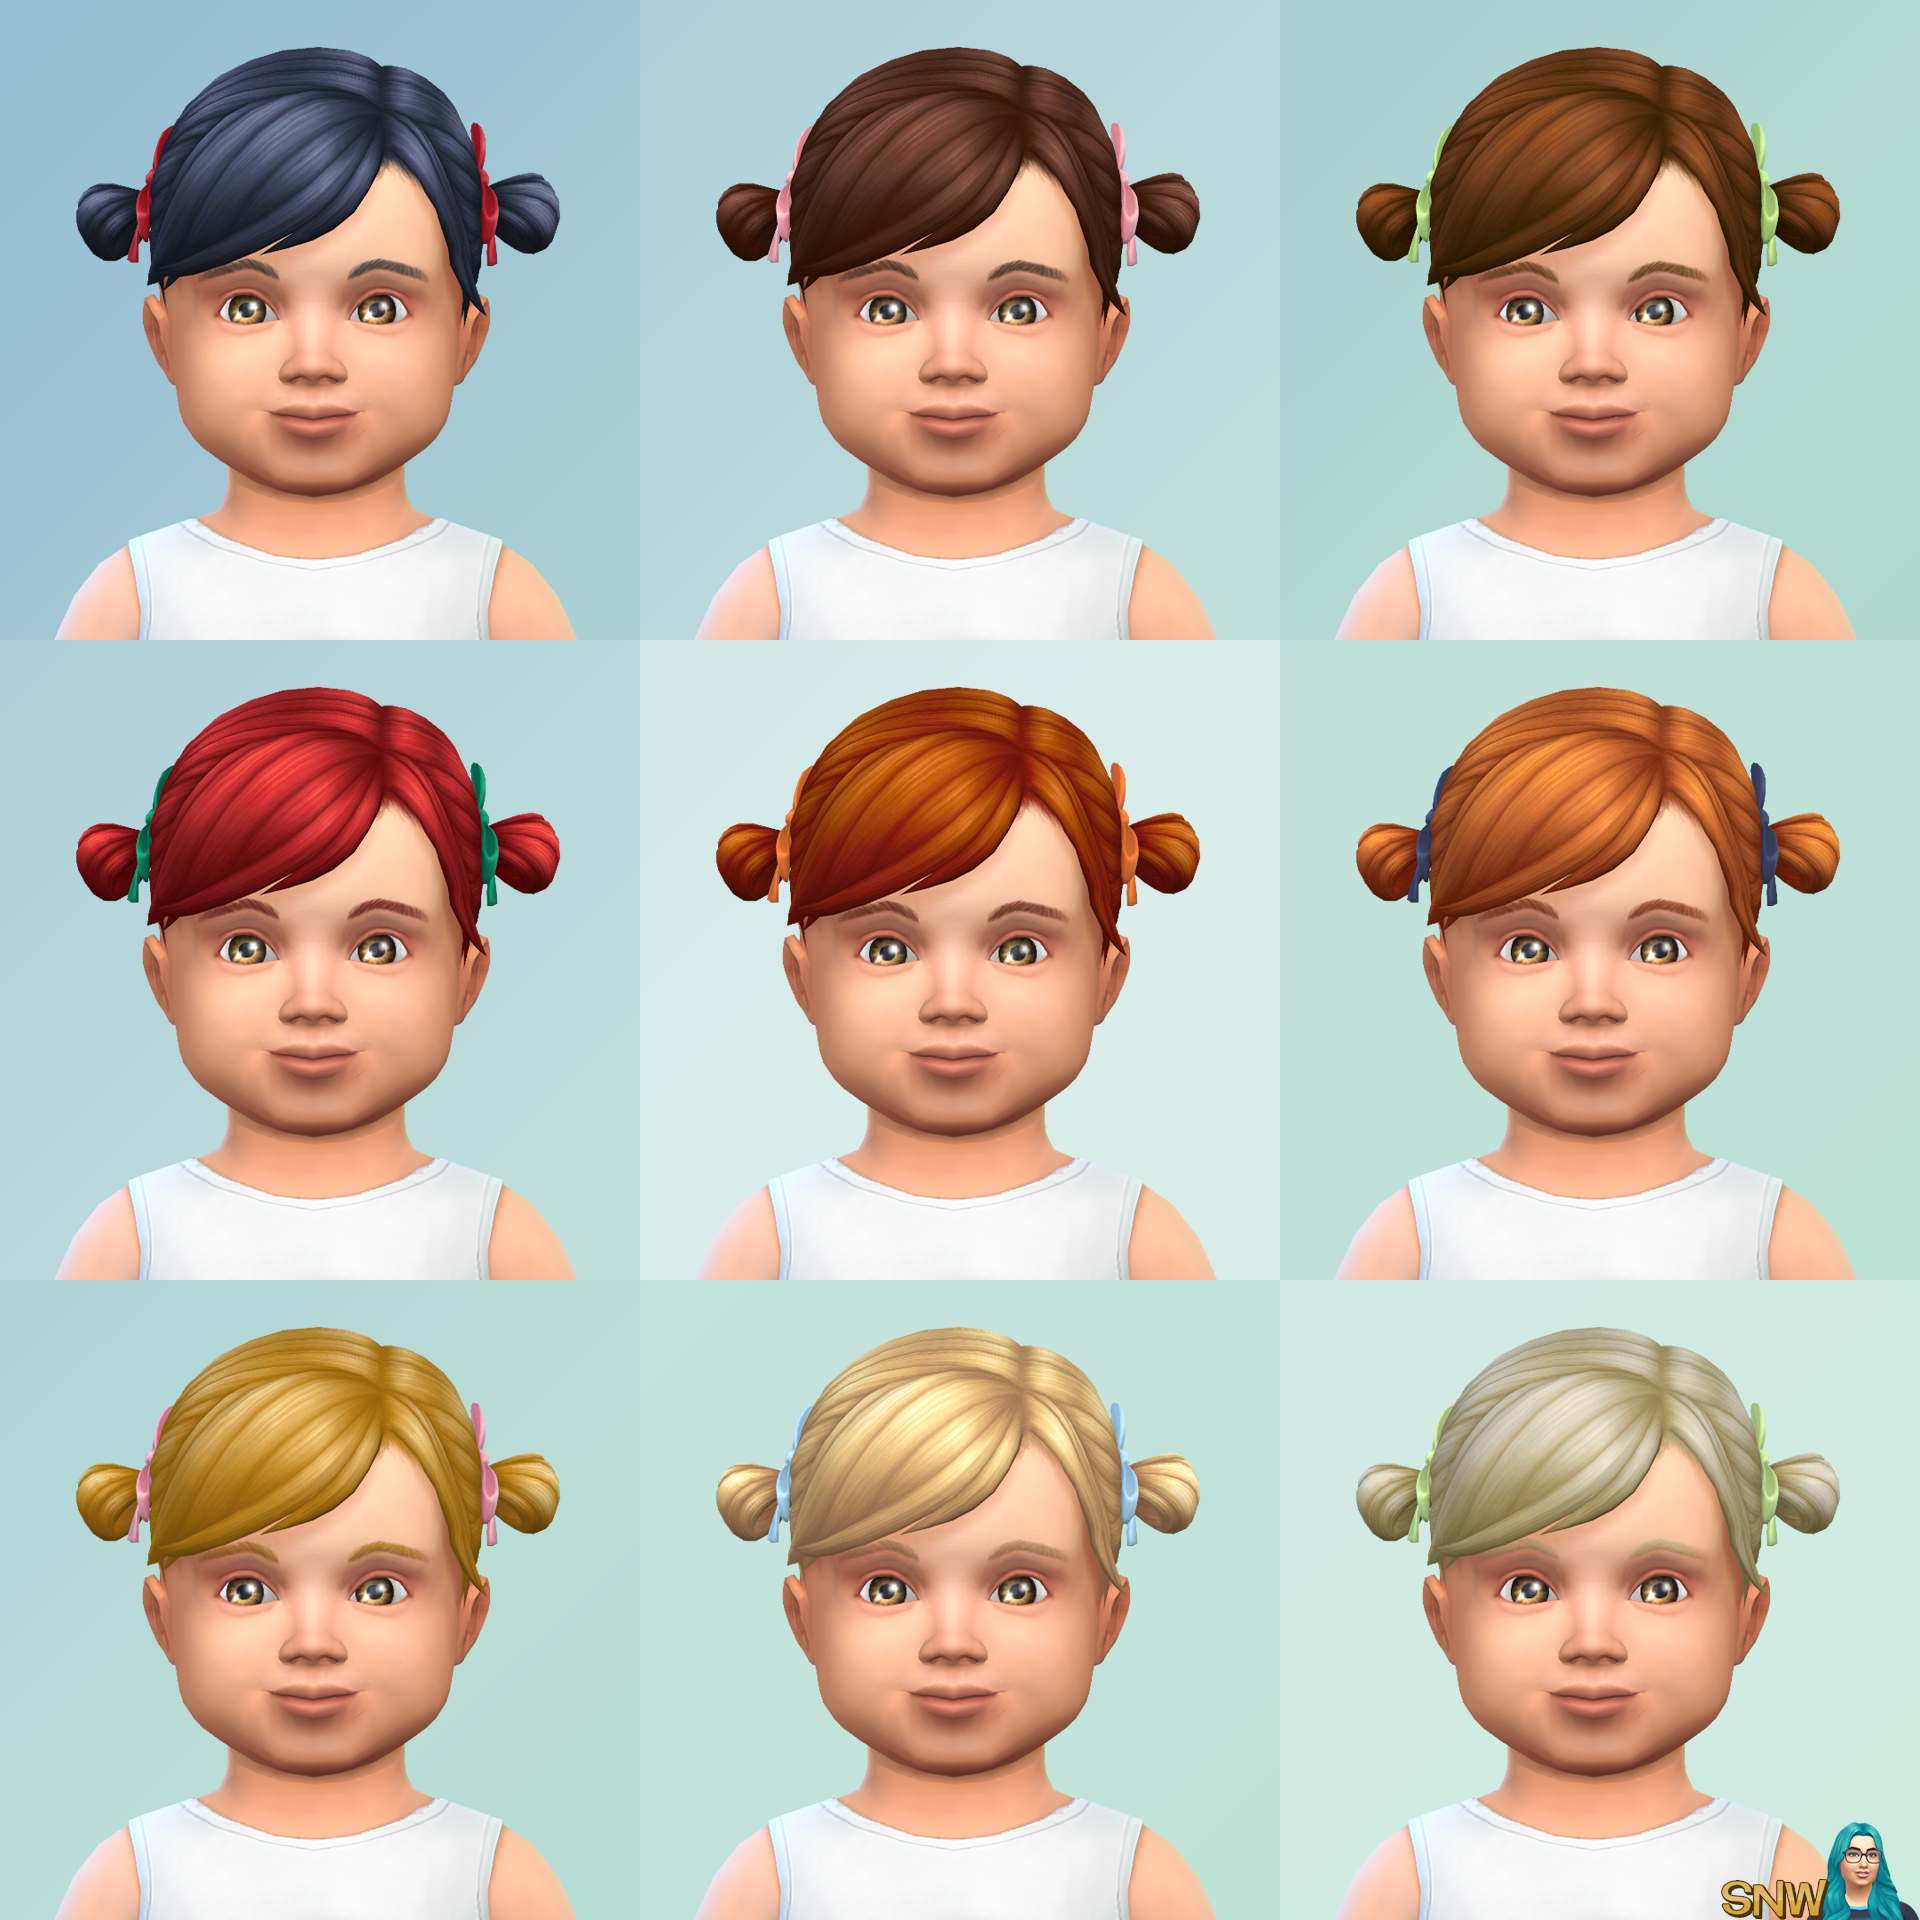 skins for toddlers sims 4